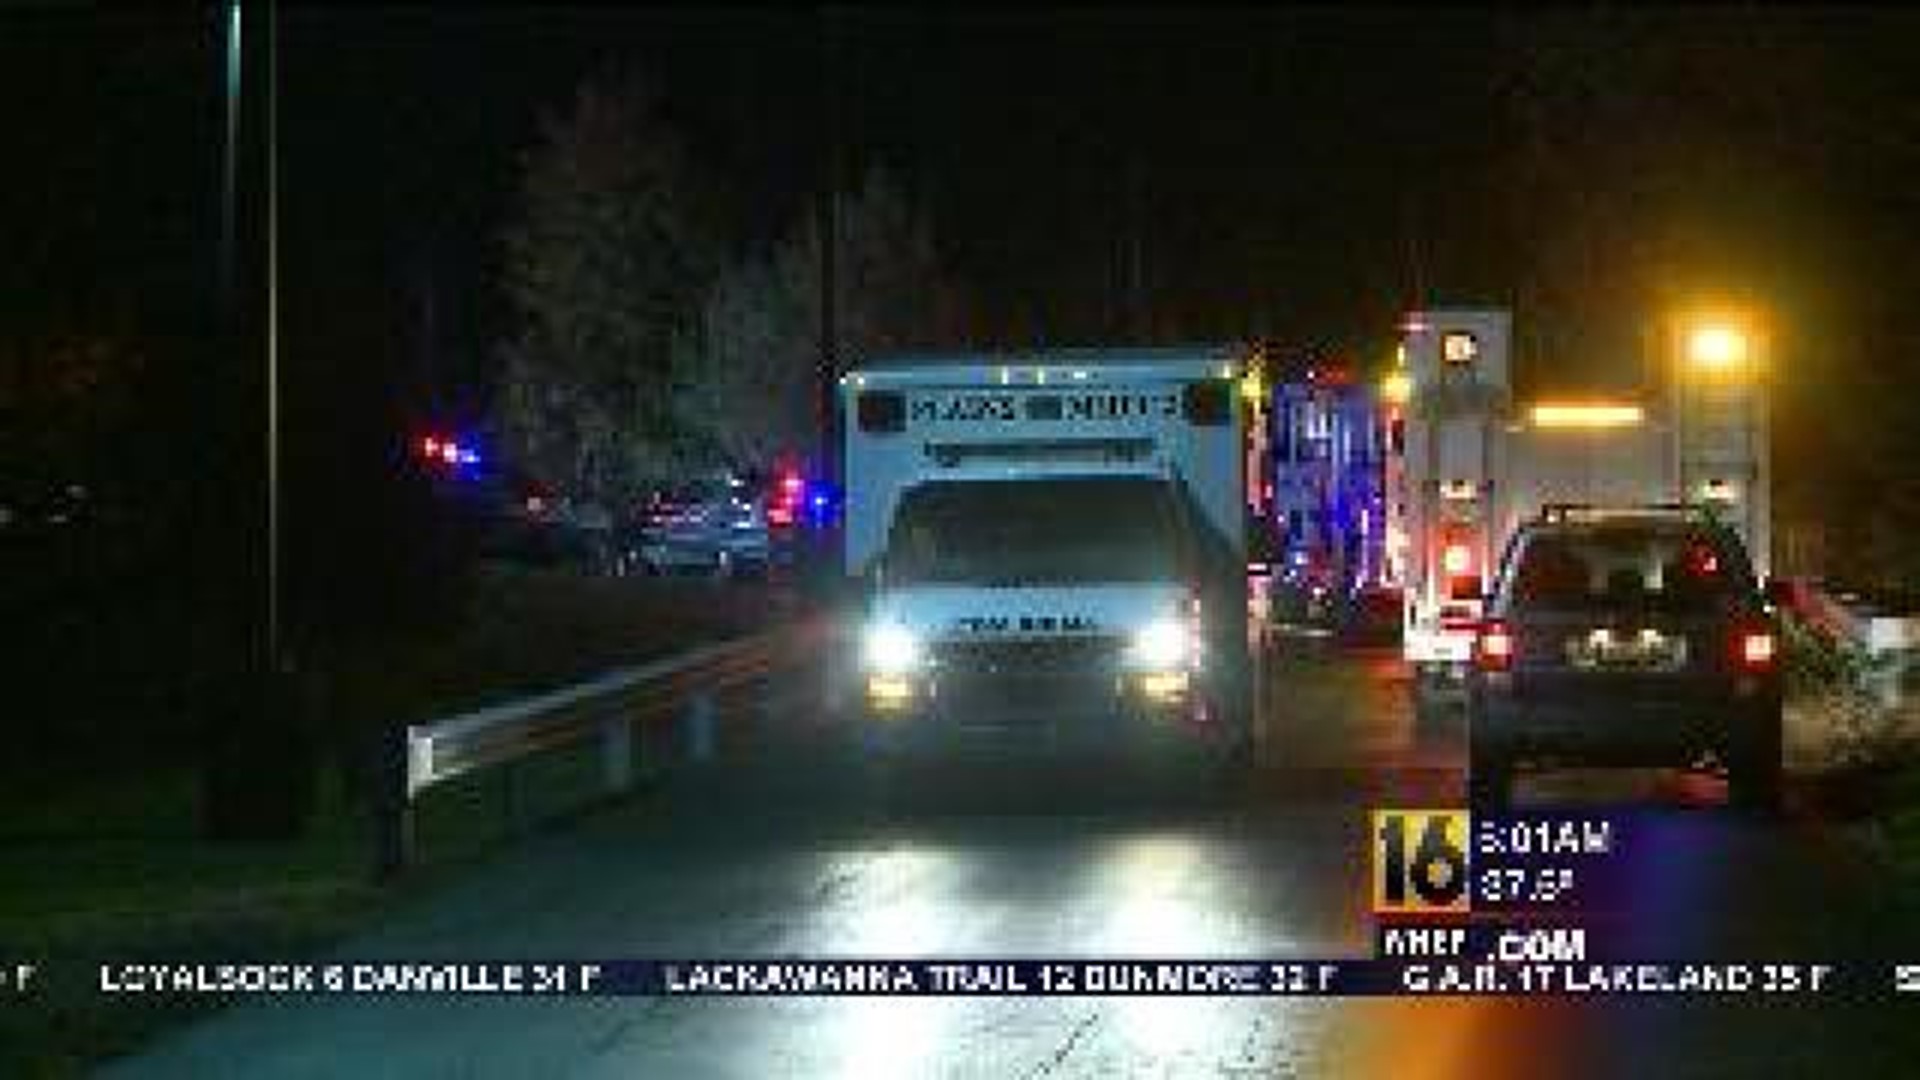 Homicide in Luzerne County